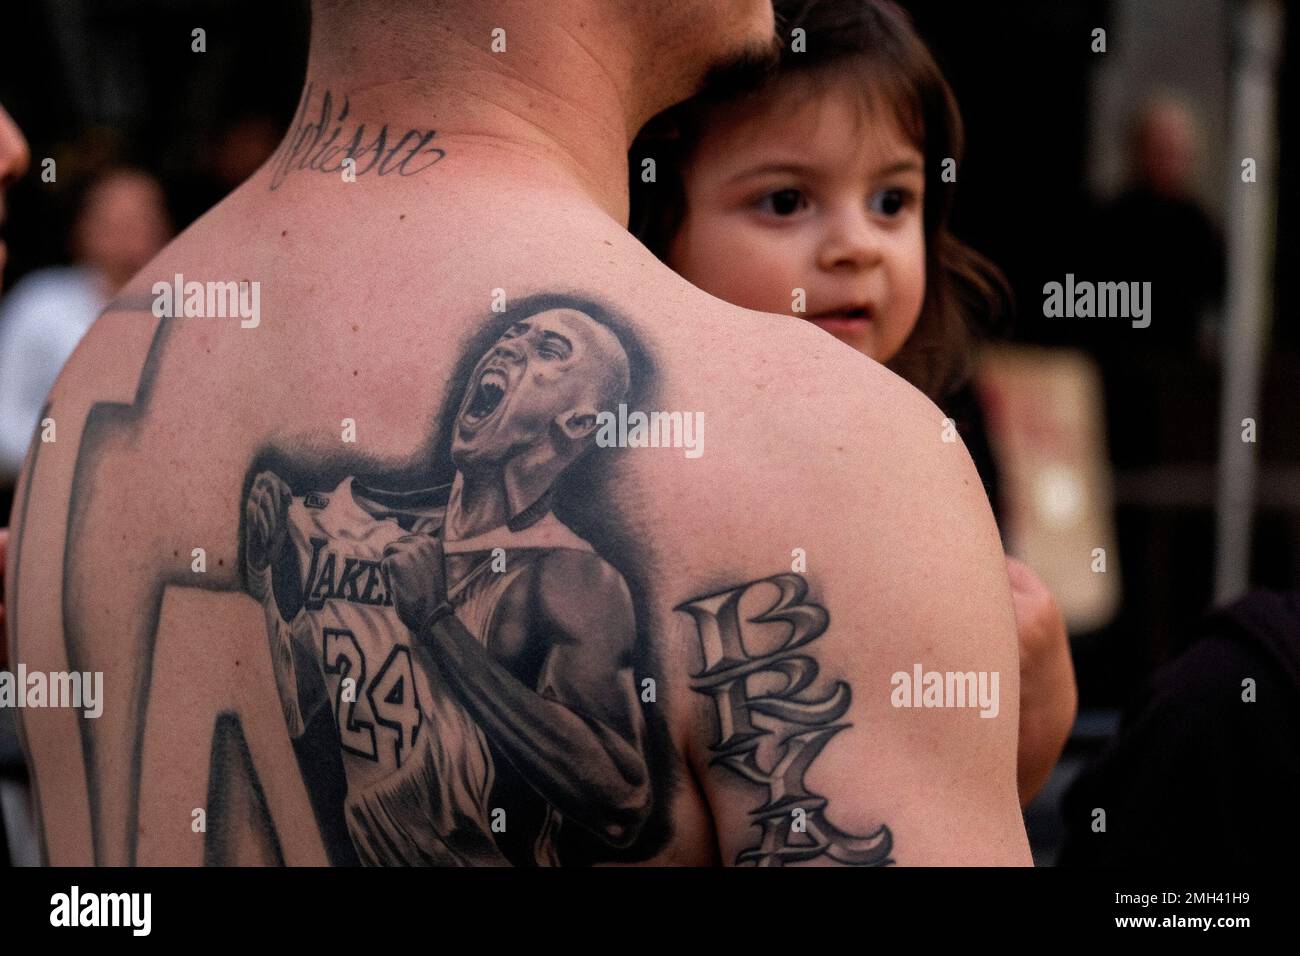 Tattoo artists are receiving an influx of requests for Kobeinspired ink